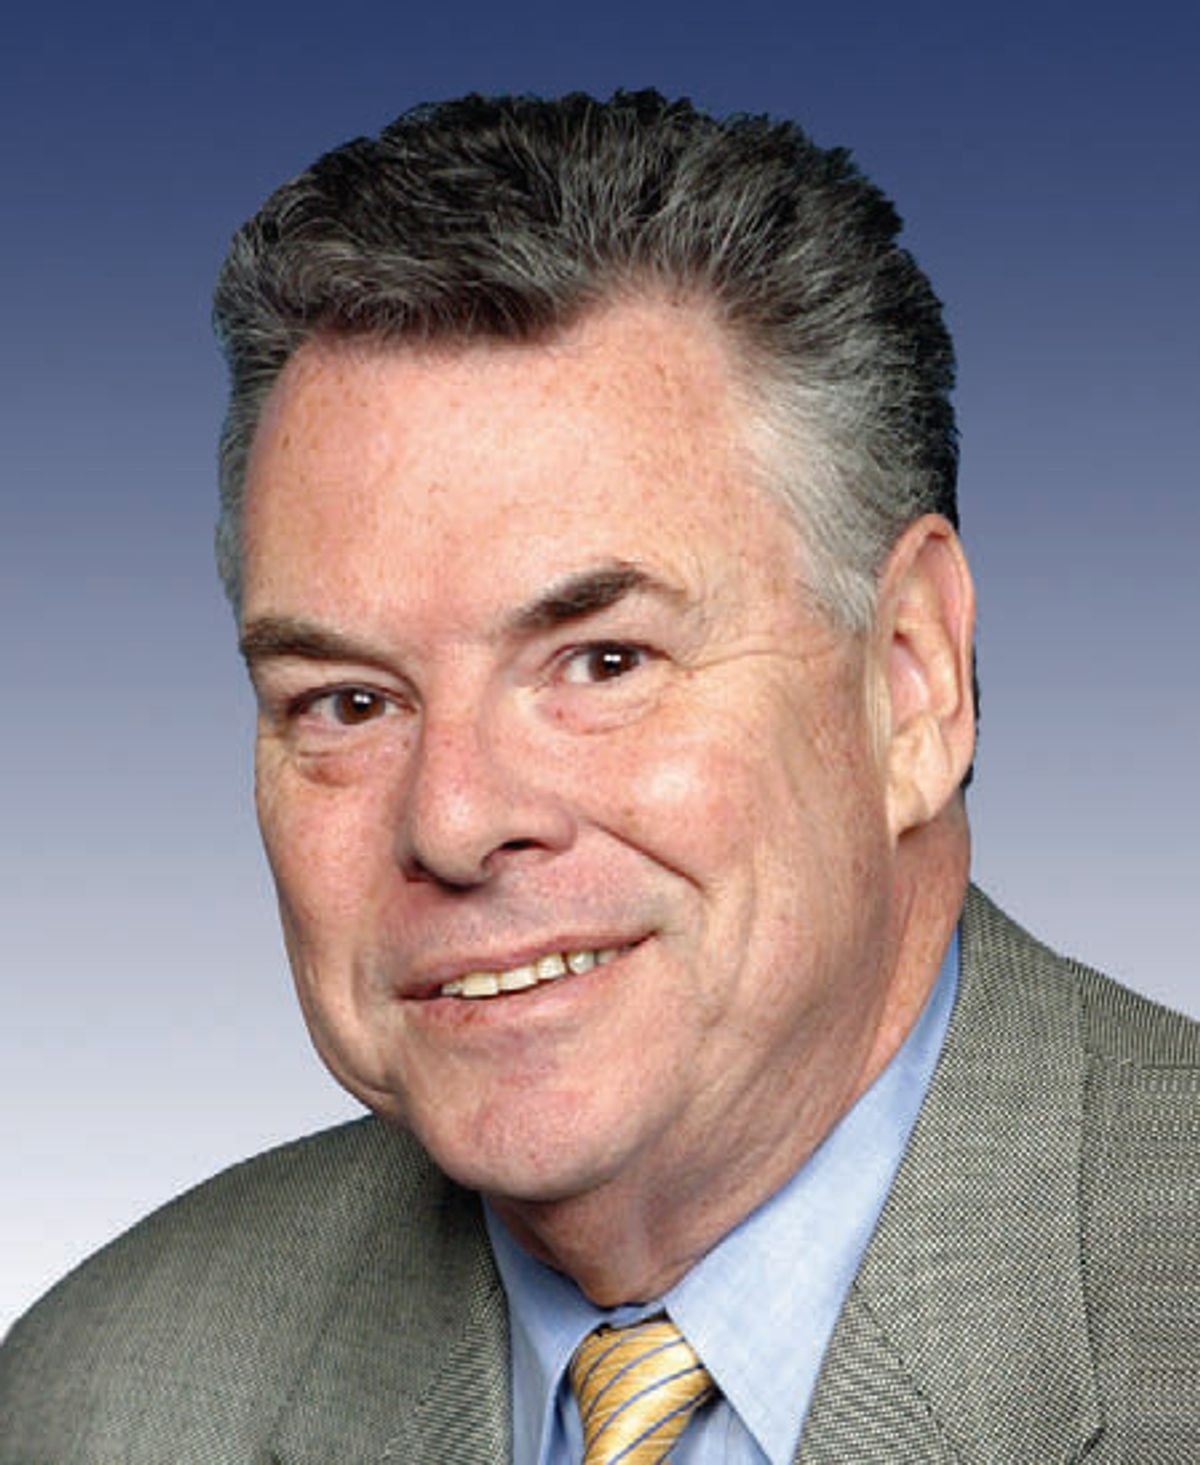 Rep. Peter King, of New York's 3rd congressional district            